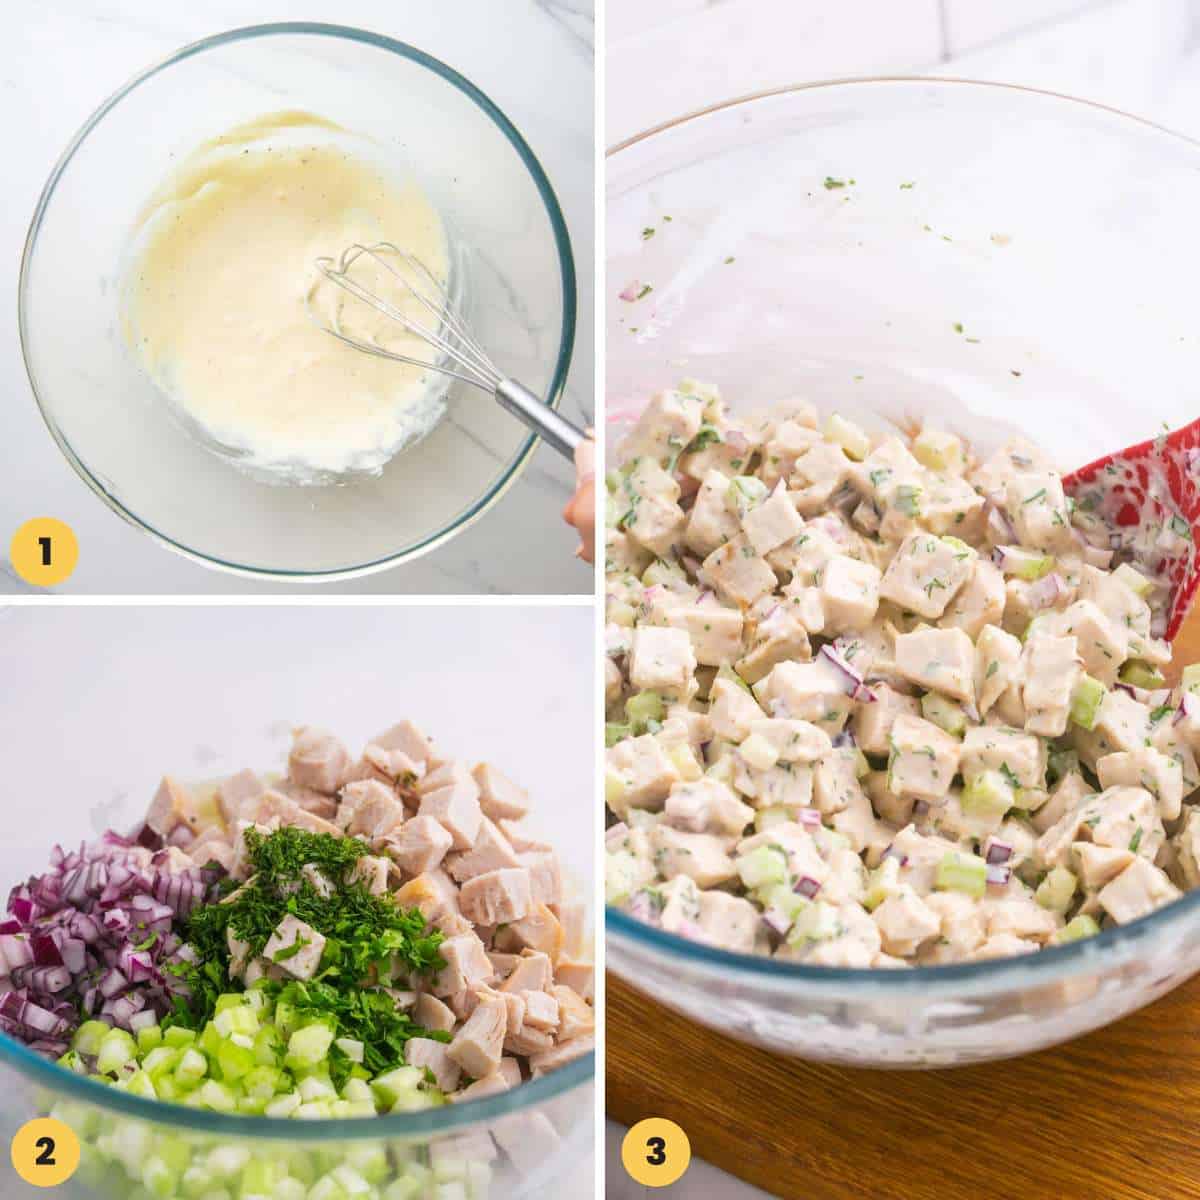 Collage of 3 images showing how to make turkey salad